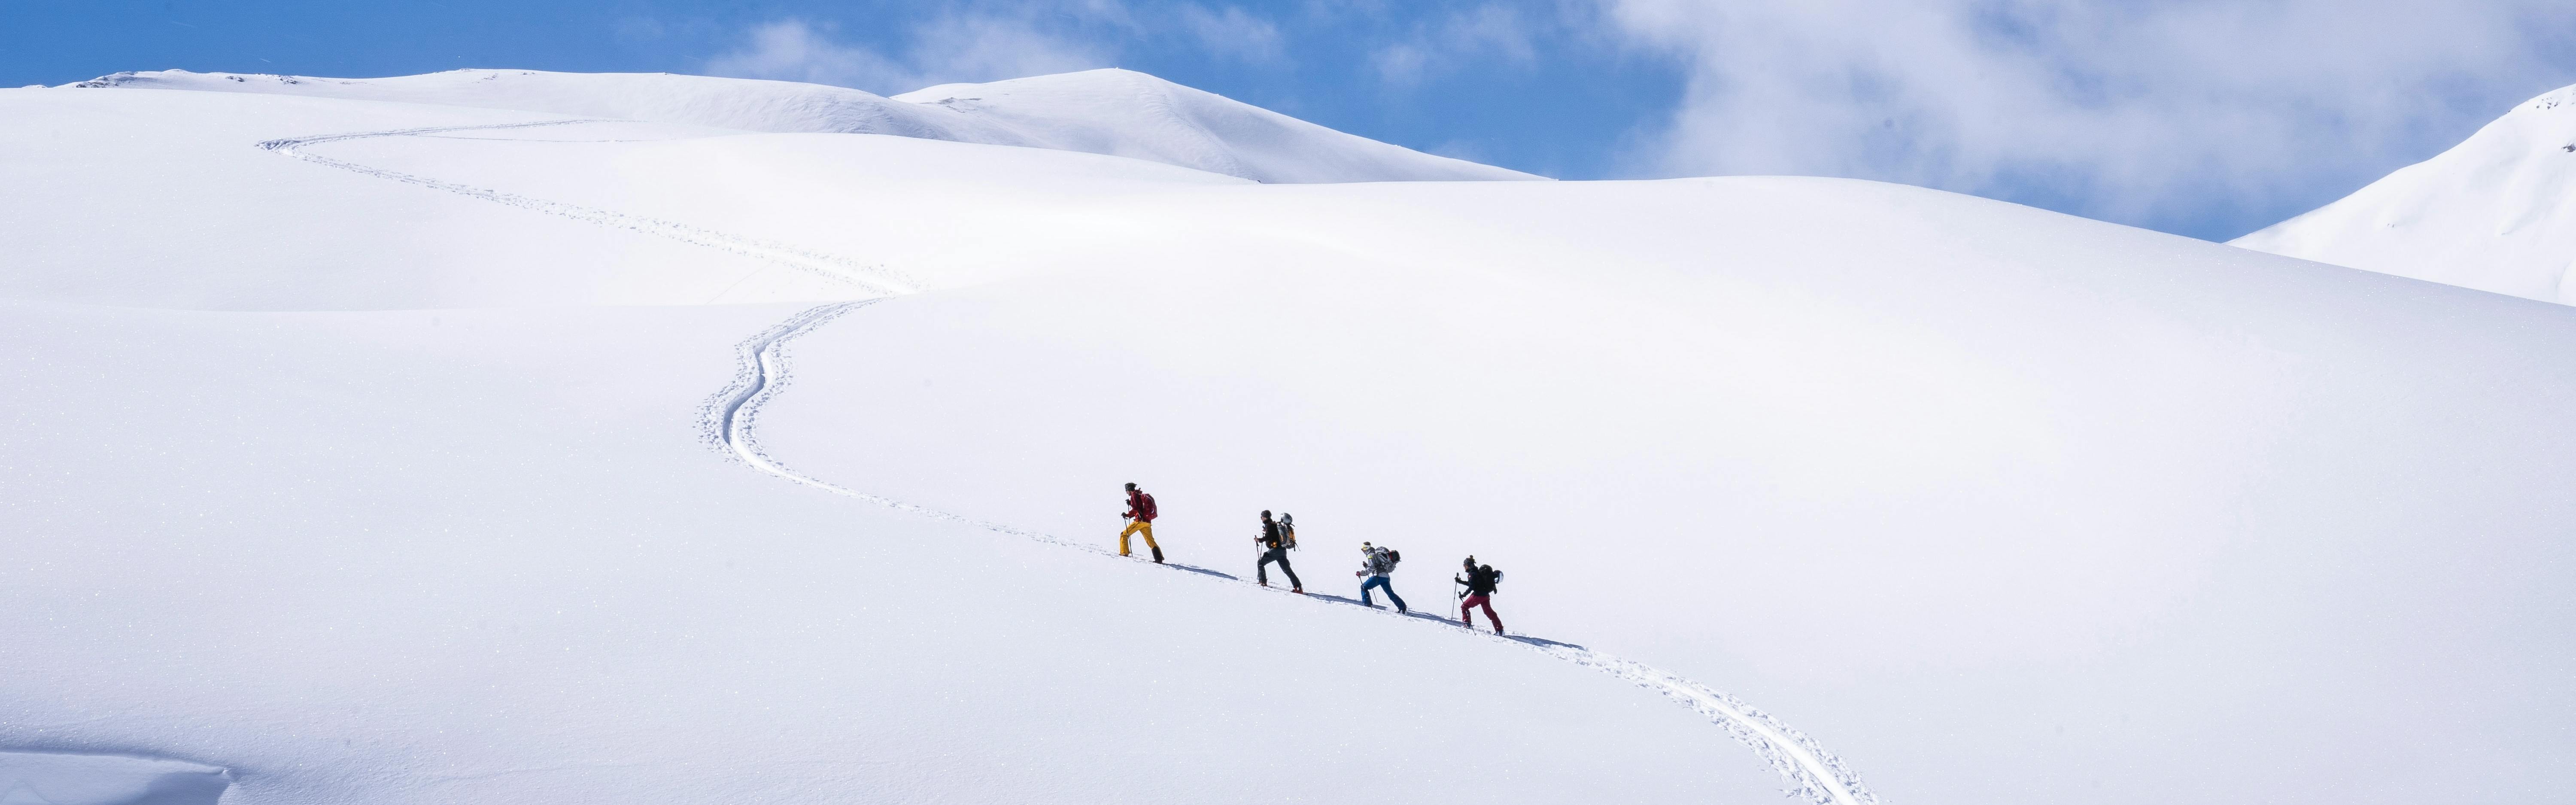 Four people follow a skin track up a snowy mountain.